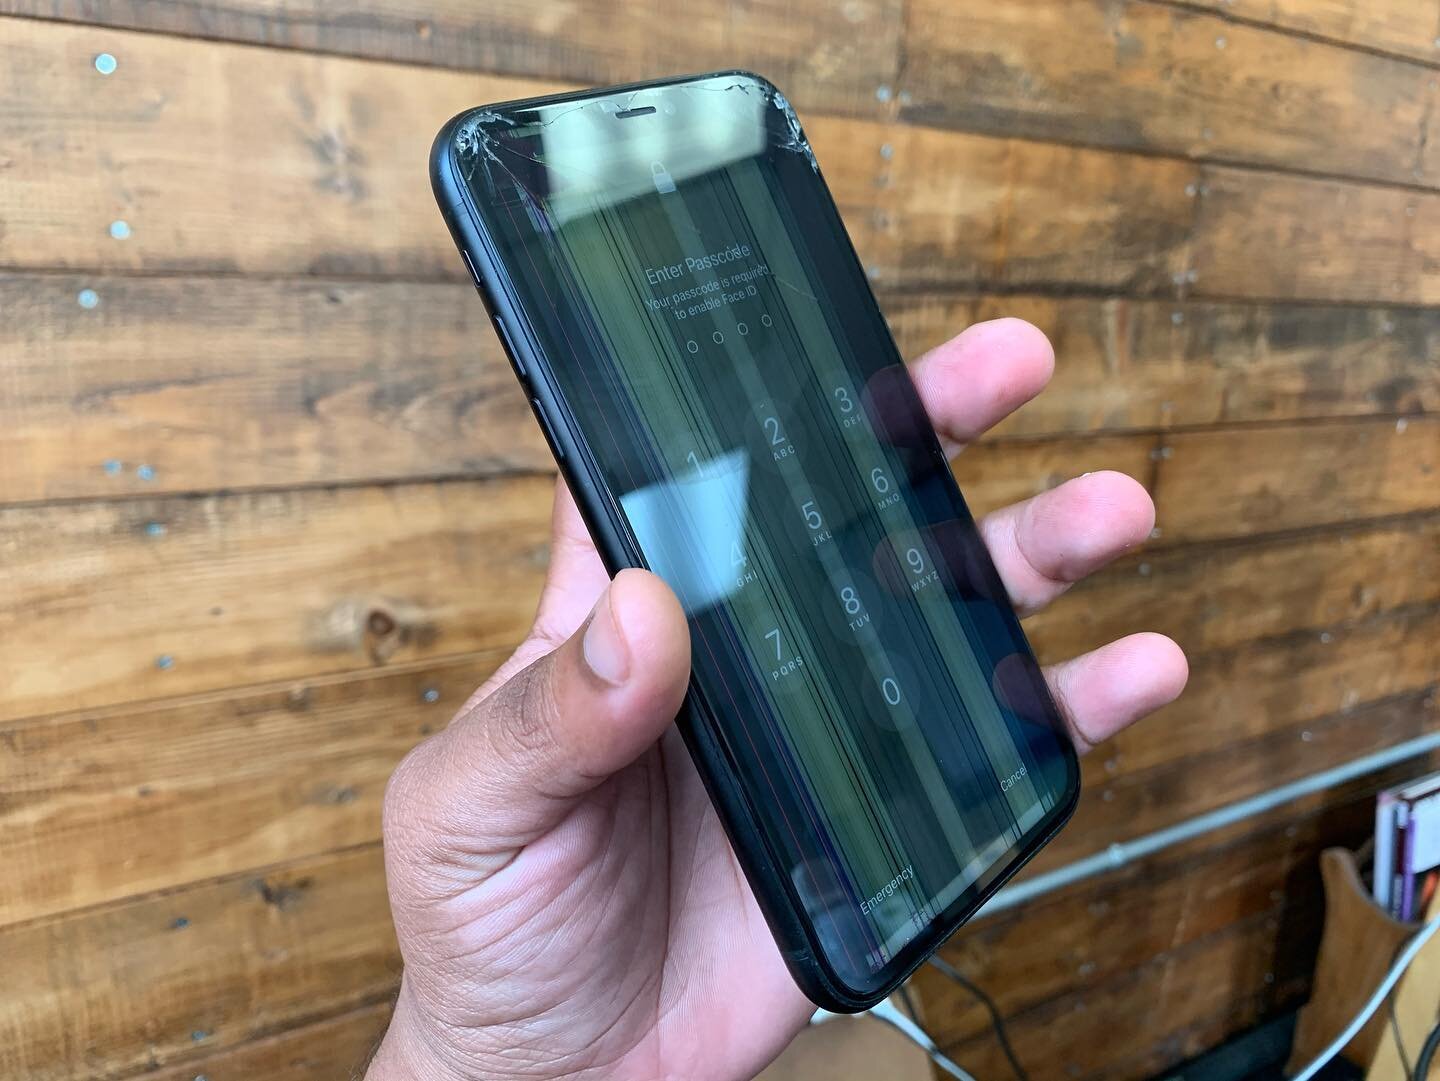 iPhone XR Screen Repair for @ranxman  Original Screen + Lifetime Warranty + FREE Tempered Glass Protector. 📲Call, Text, or slide in our DMs to schedule an appointment. You have our permission.⭐️⭐️⭐️⭐️⭐️⠀⠀⠀⠀⠀⠀⠀⠀⠀⠀⠀⠀⠀⠀⠀⠀⠀⠀ ⠀⠀⠀⠀⠀⠀⠀⠀⠀⠀⠀⠀⠀⠀⠀⠀⠀⠀
💻 Ezekie